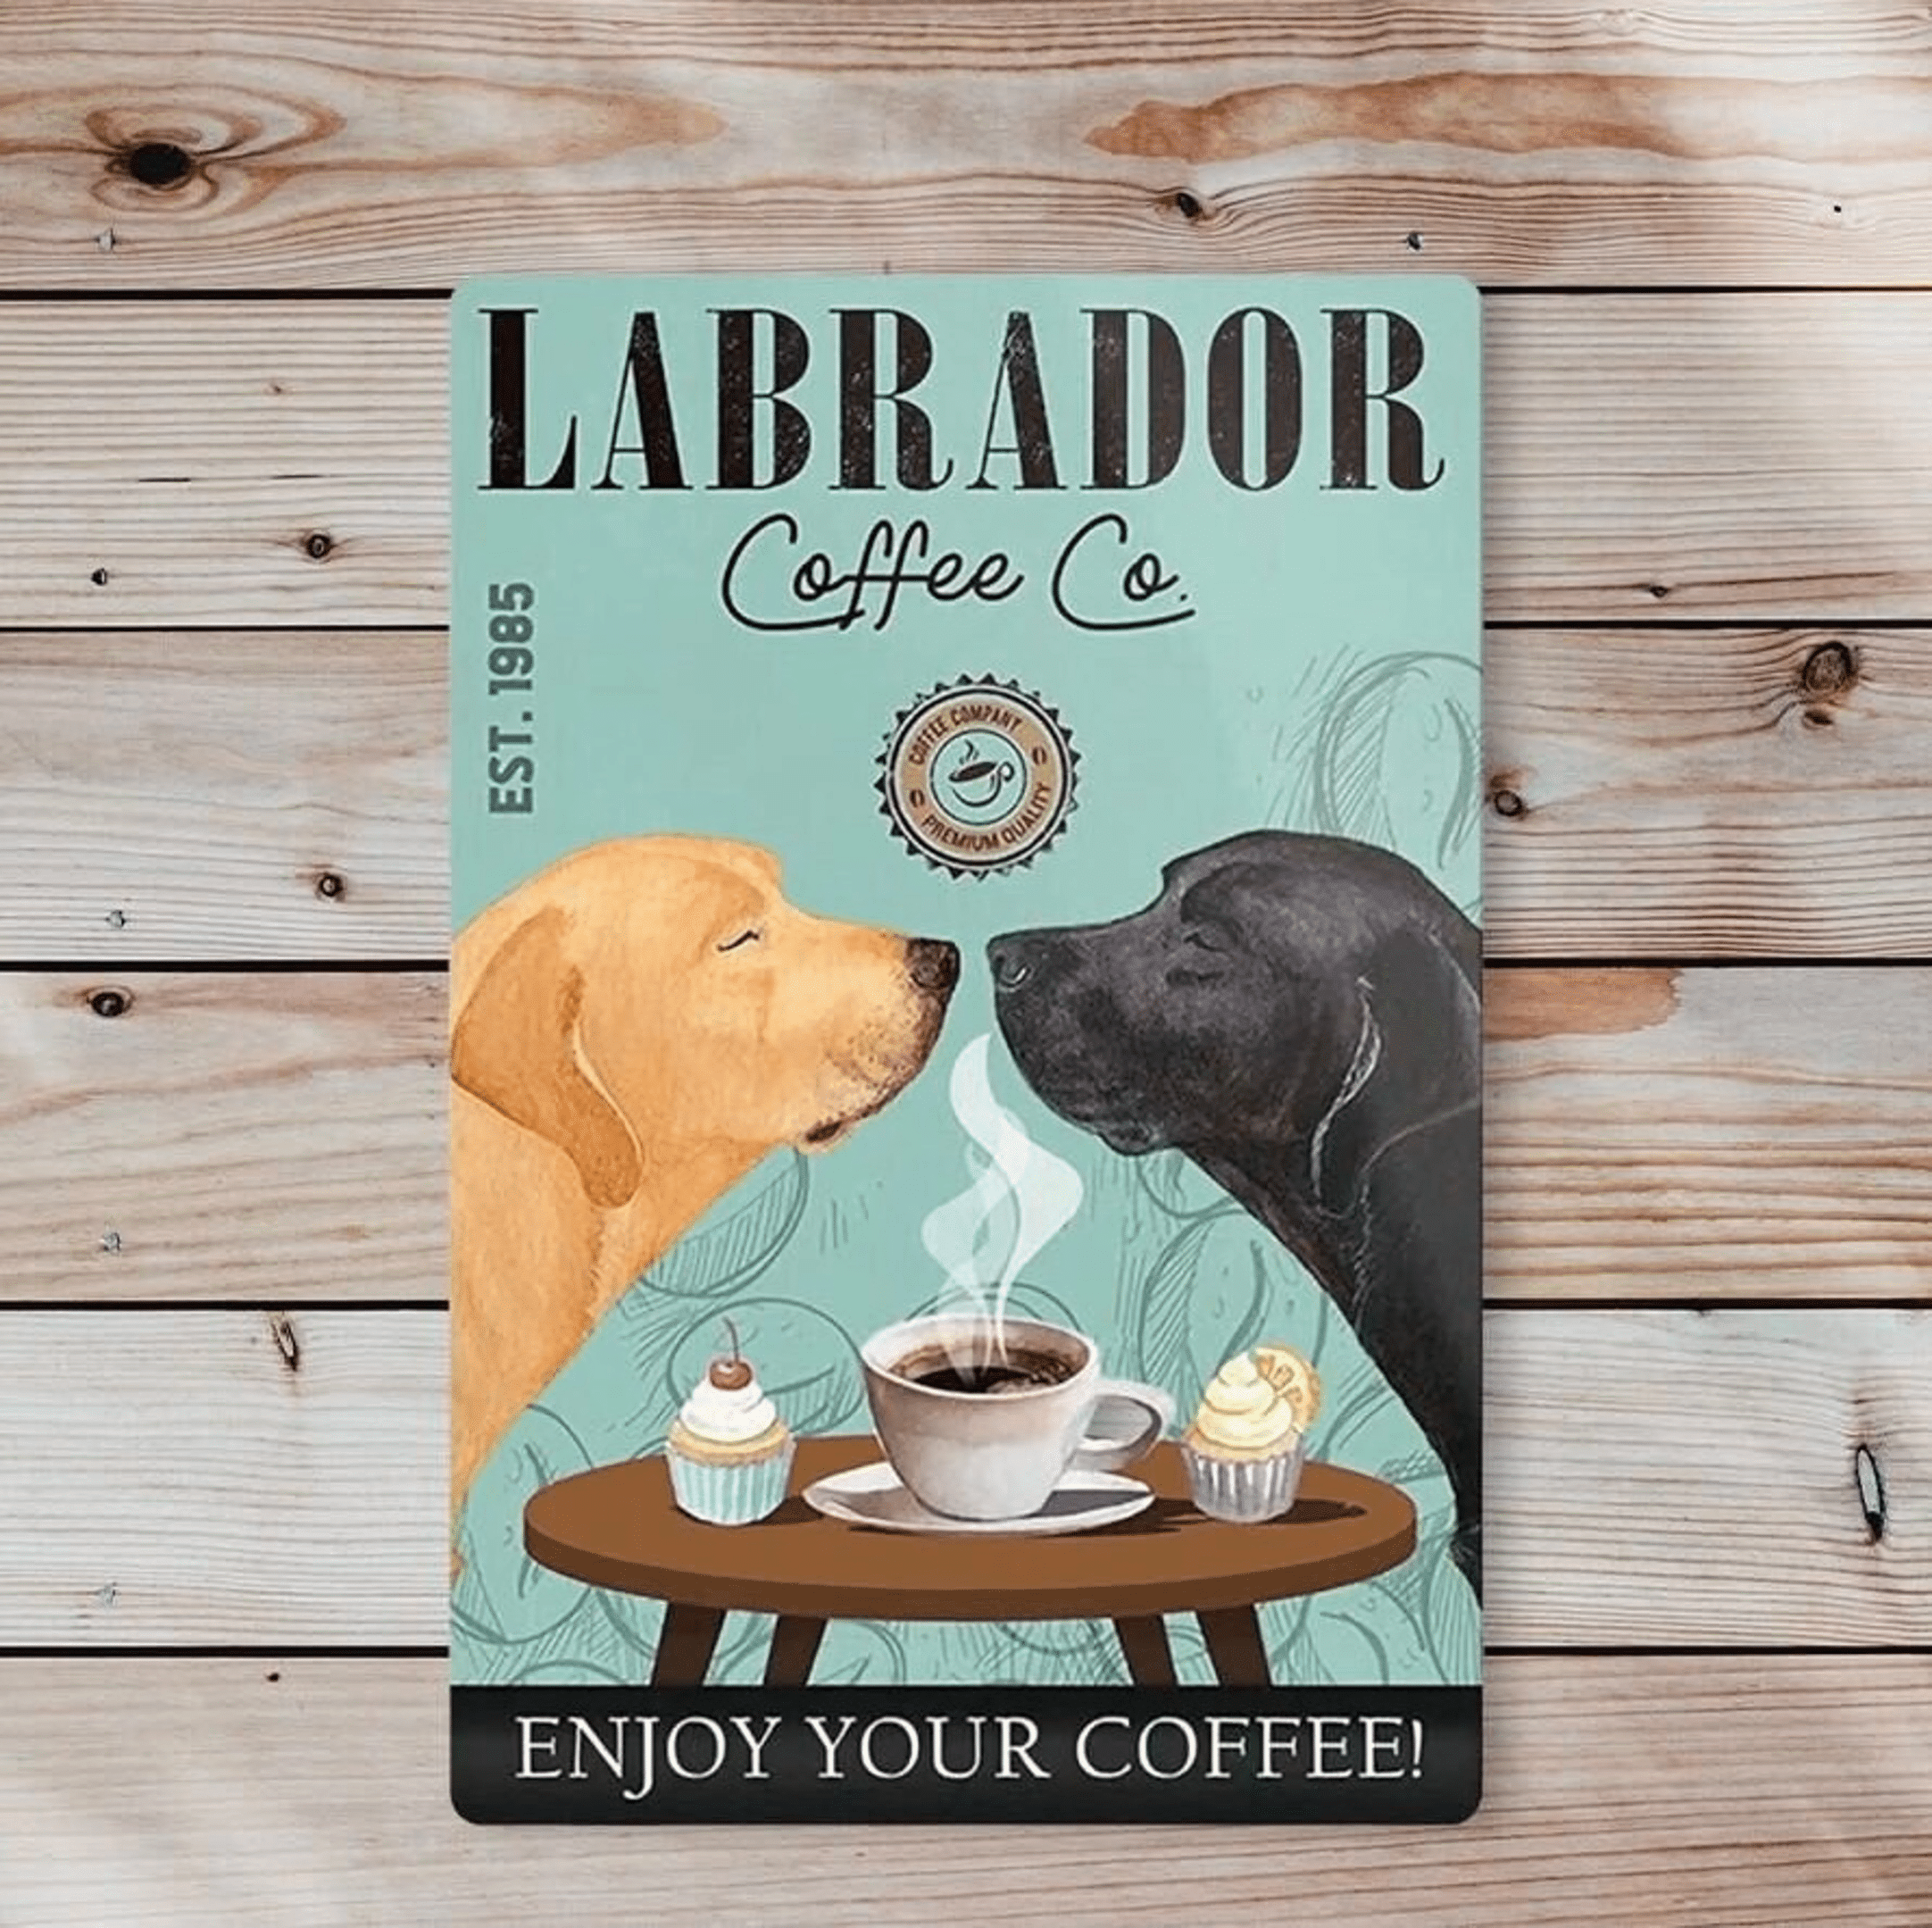 Retro Tin Sign | Labrador Coffee Co. Enjoy You Coffee Sign | Dogs Art Poster | Dogs Lovers Gifts | Vintage Bar Cafe Art Wall Decor  in